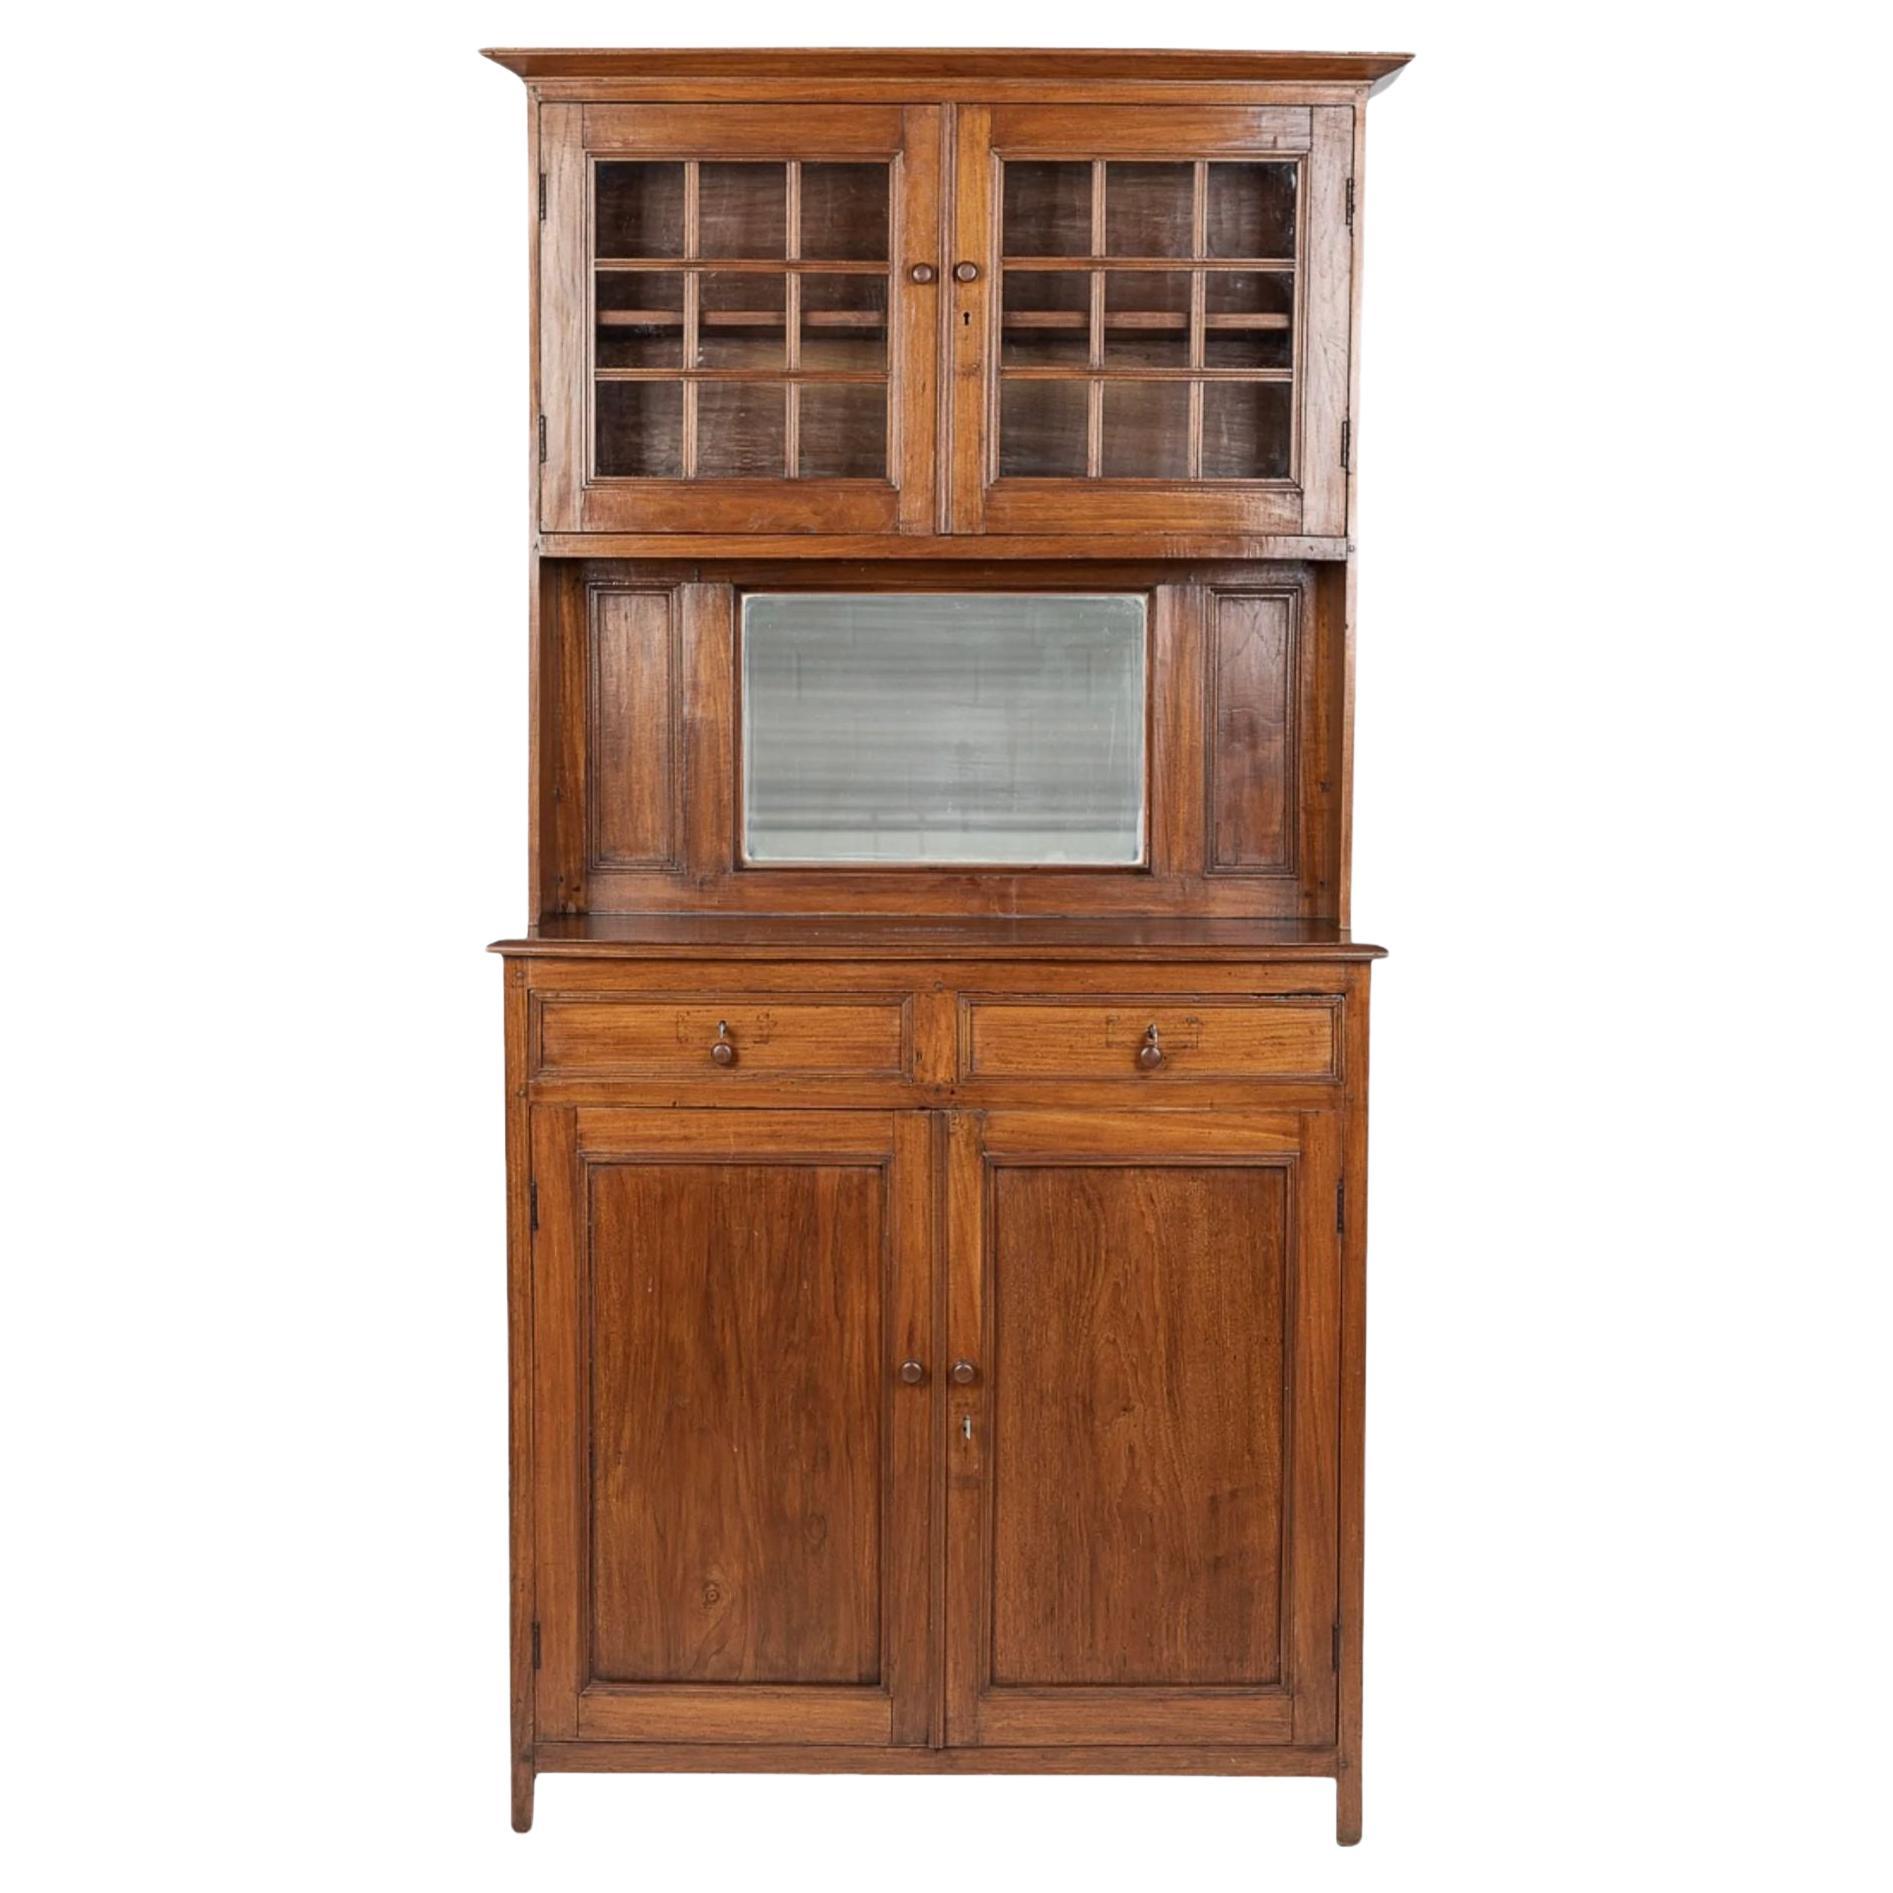 Antique American Wooden Cupboard Storage Cabinet, Late 1800s